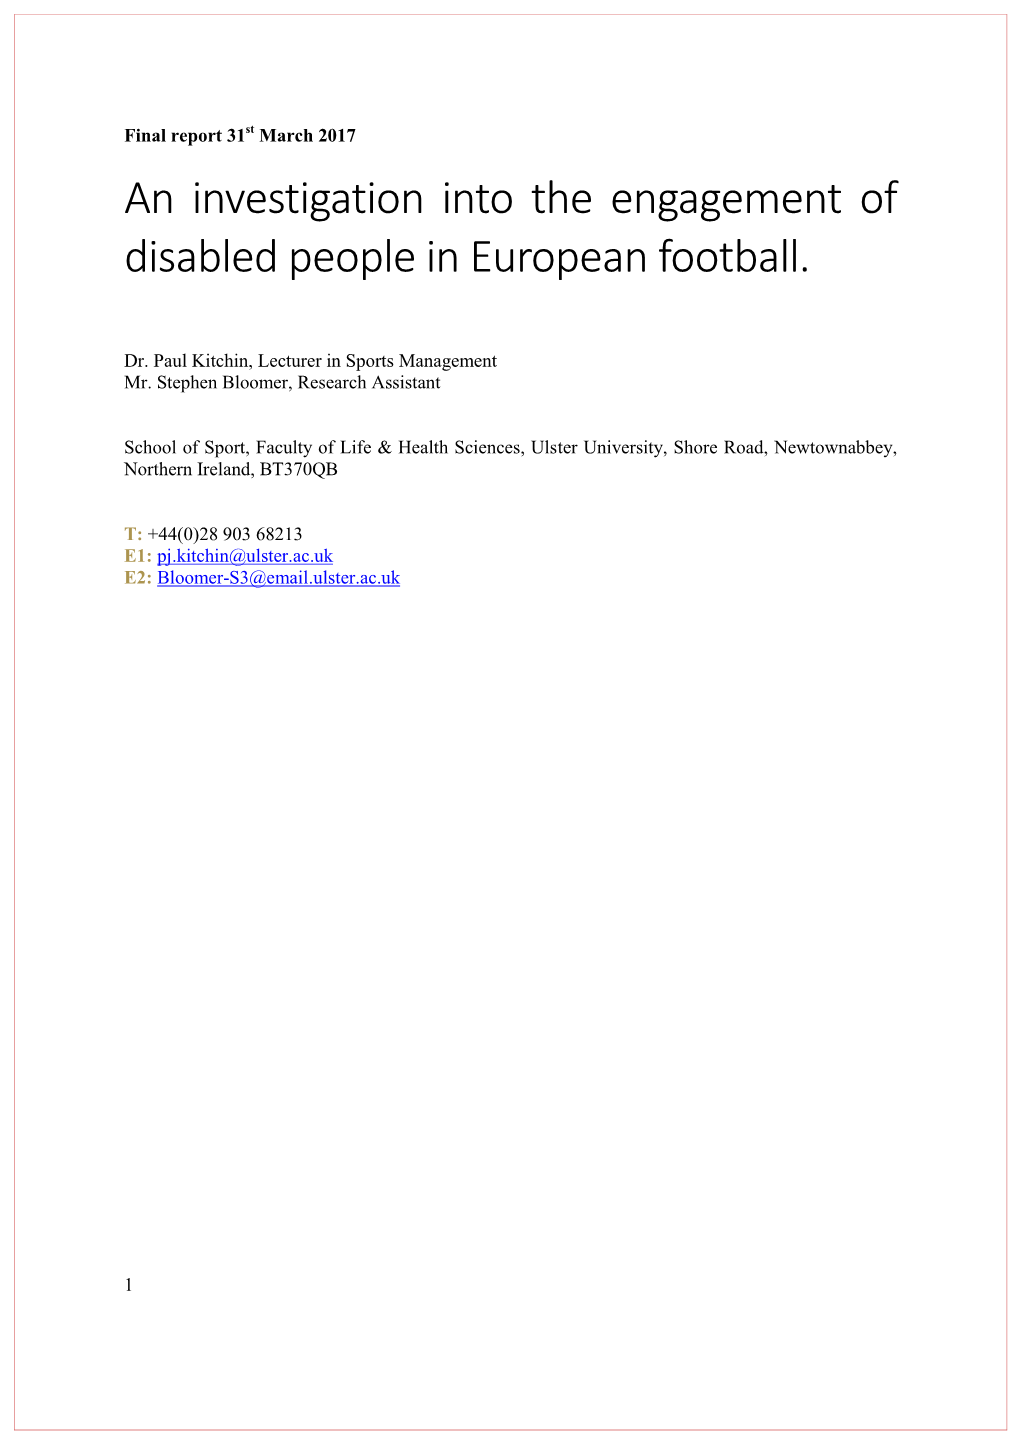 An Investigation Into the Engagement of Disabled People in European Football